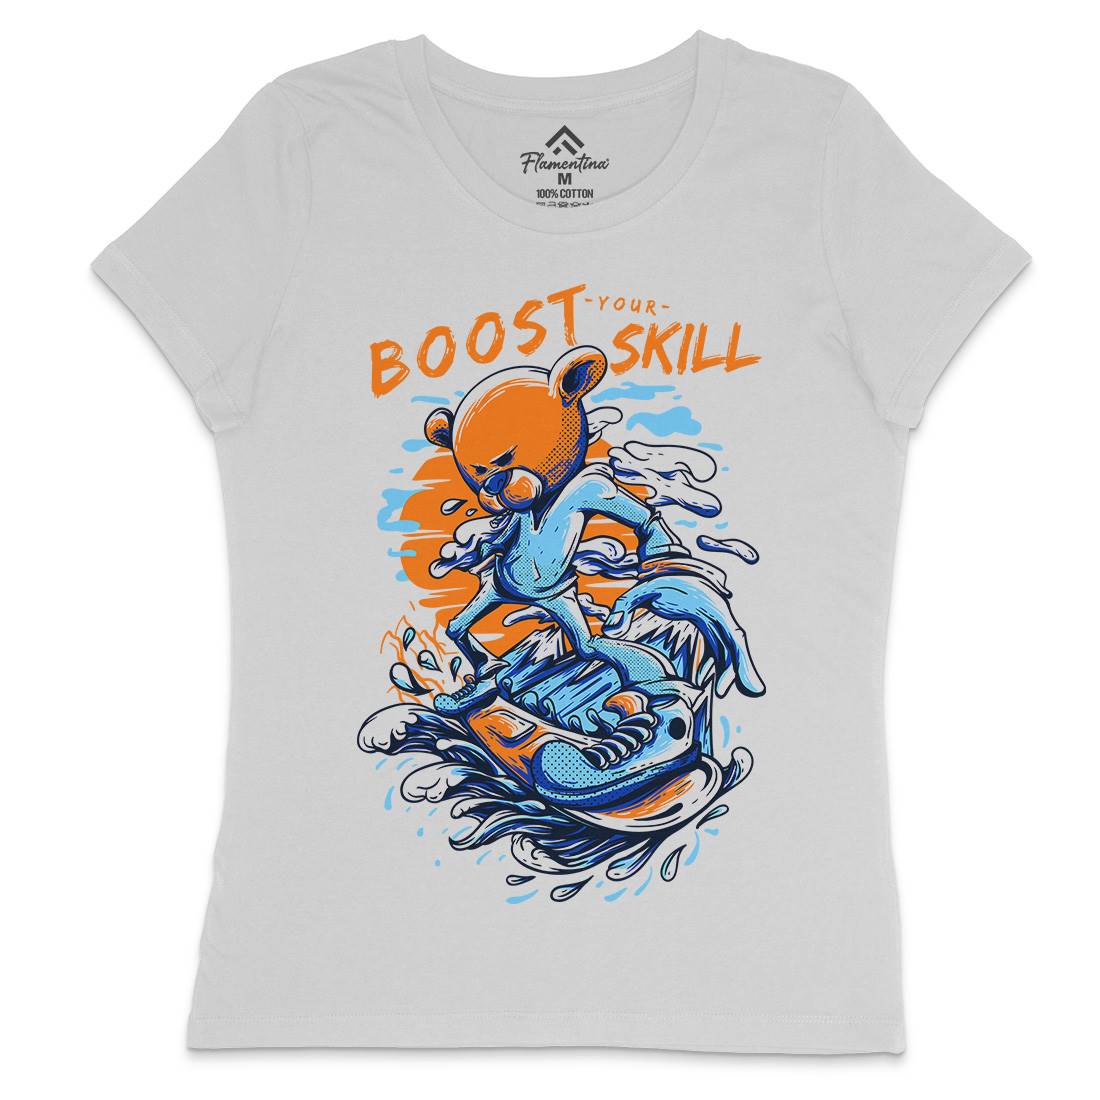 Boost Your Skill Womens Crew Neck T-Shirt Surf D716